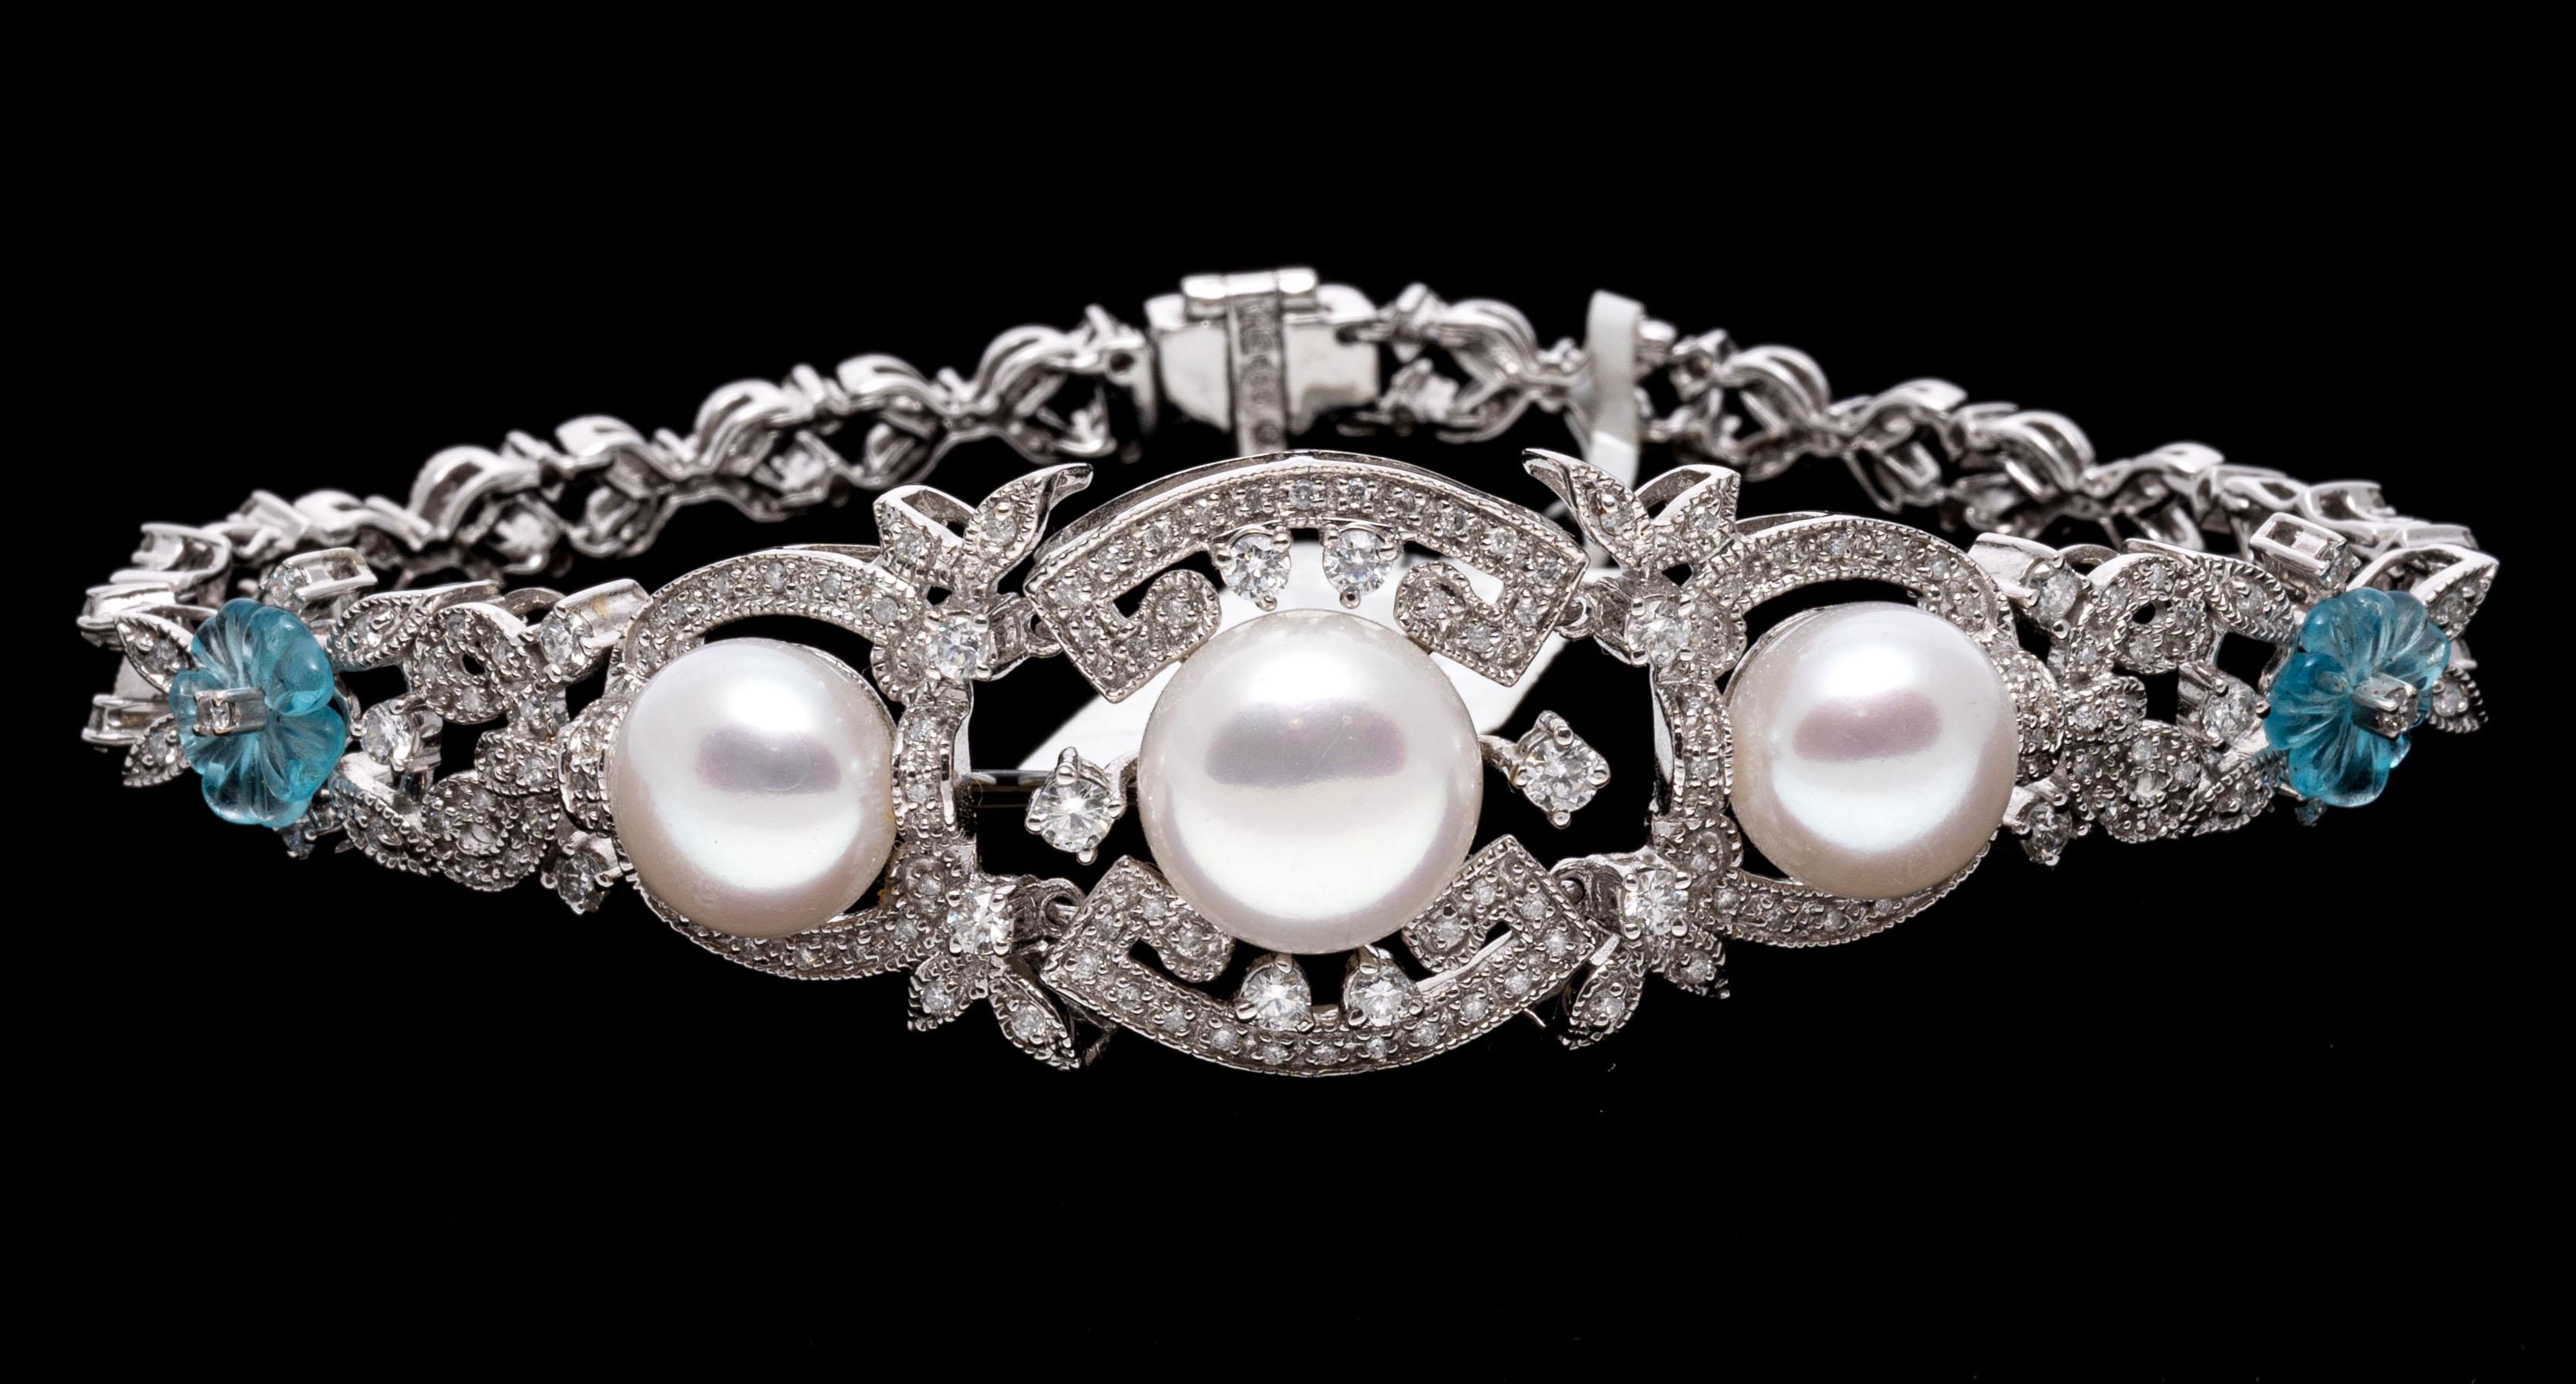 14K White Gold Baroque Revival Pearl and Diamond Bracelet With Blue Topaz Flower For Sale 5